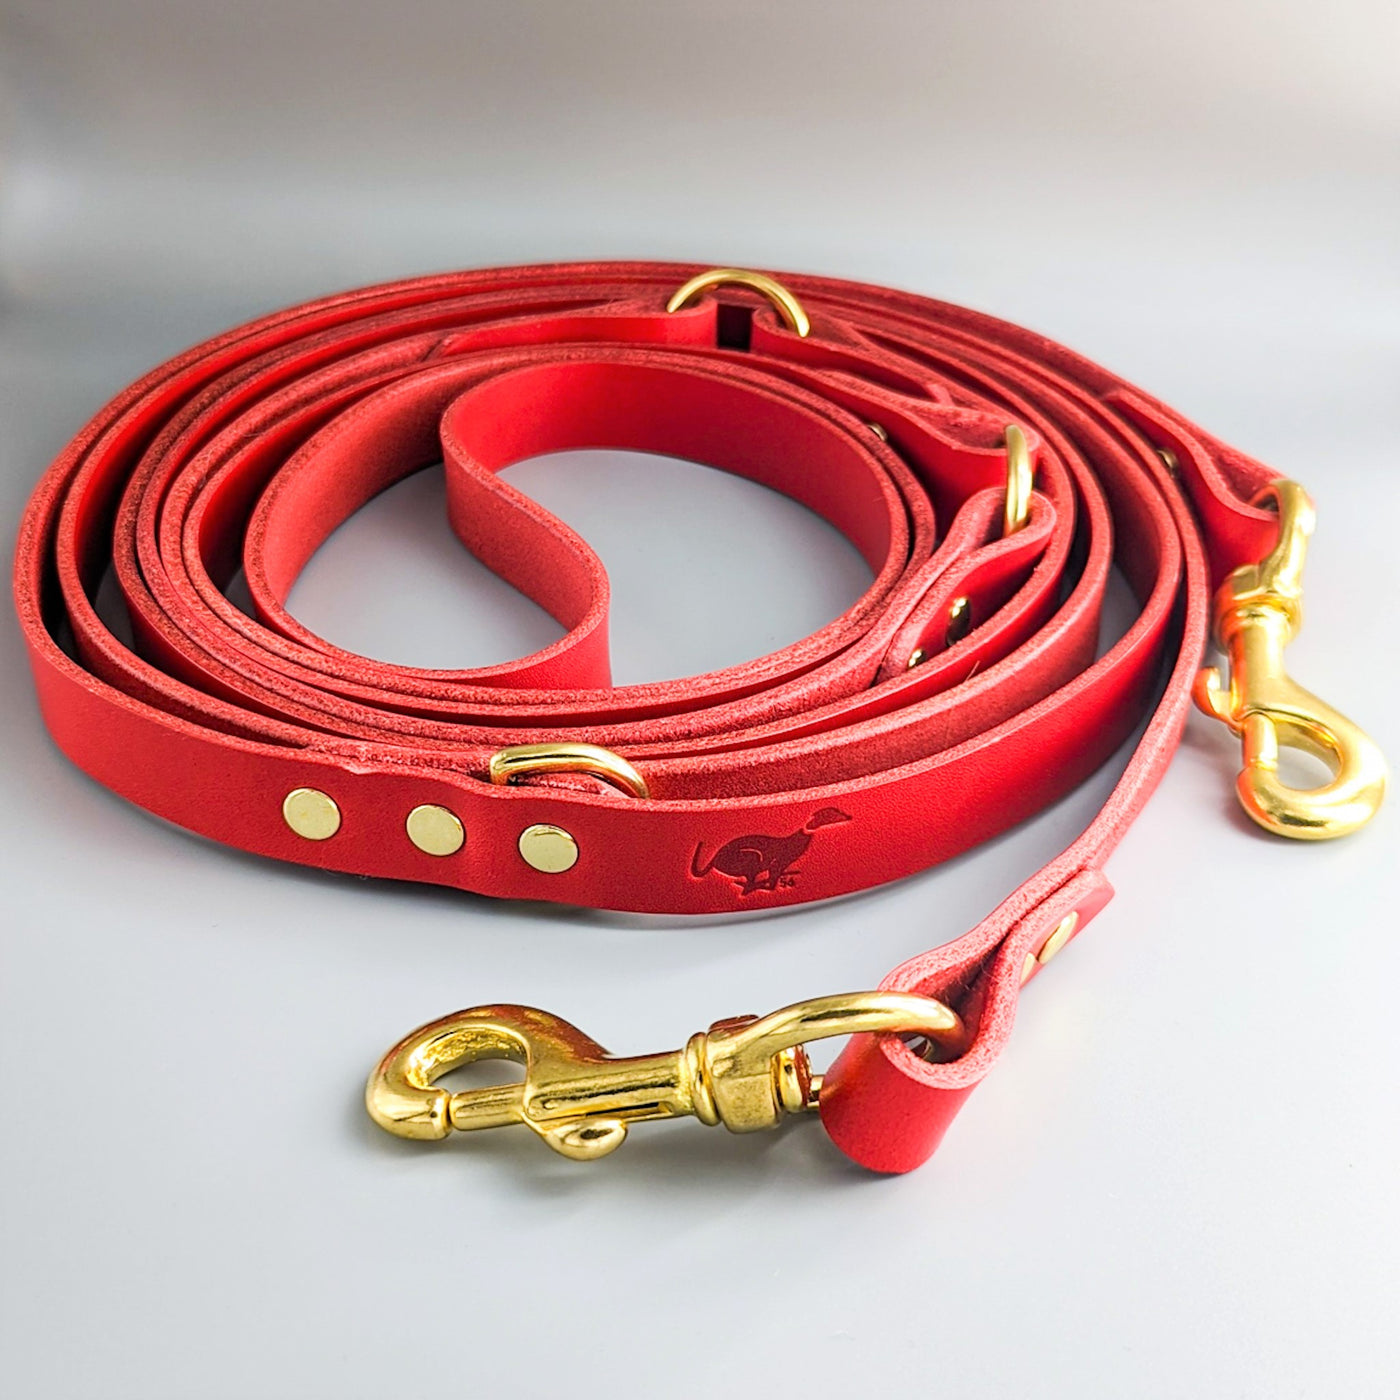 Classic Leather Dog Collar & Lead Set in Cavendish Red